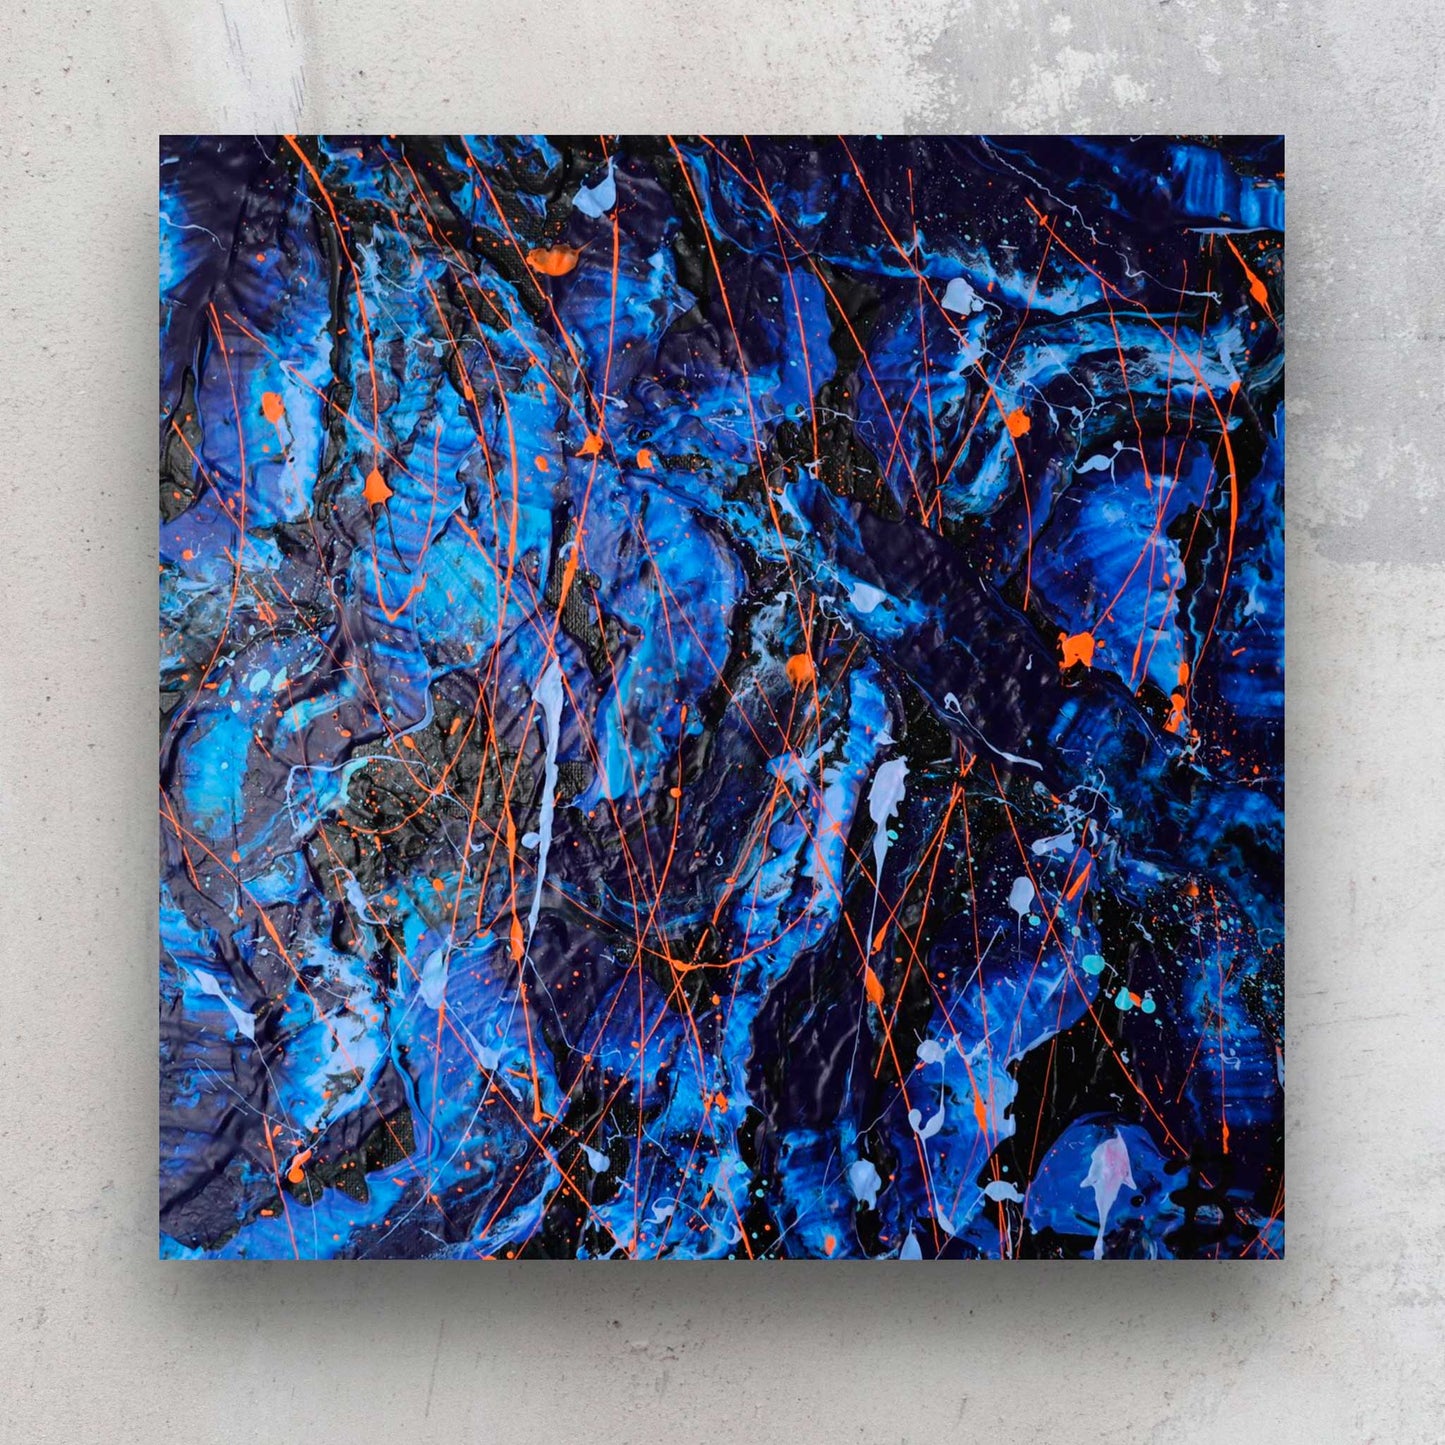 Enigma hand painted heavy texture abstract in blues, black with neon orange marks. Commissioned artwork 2023